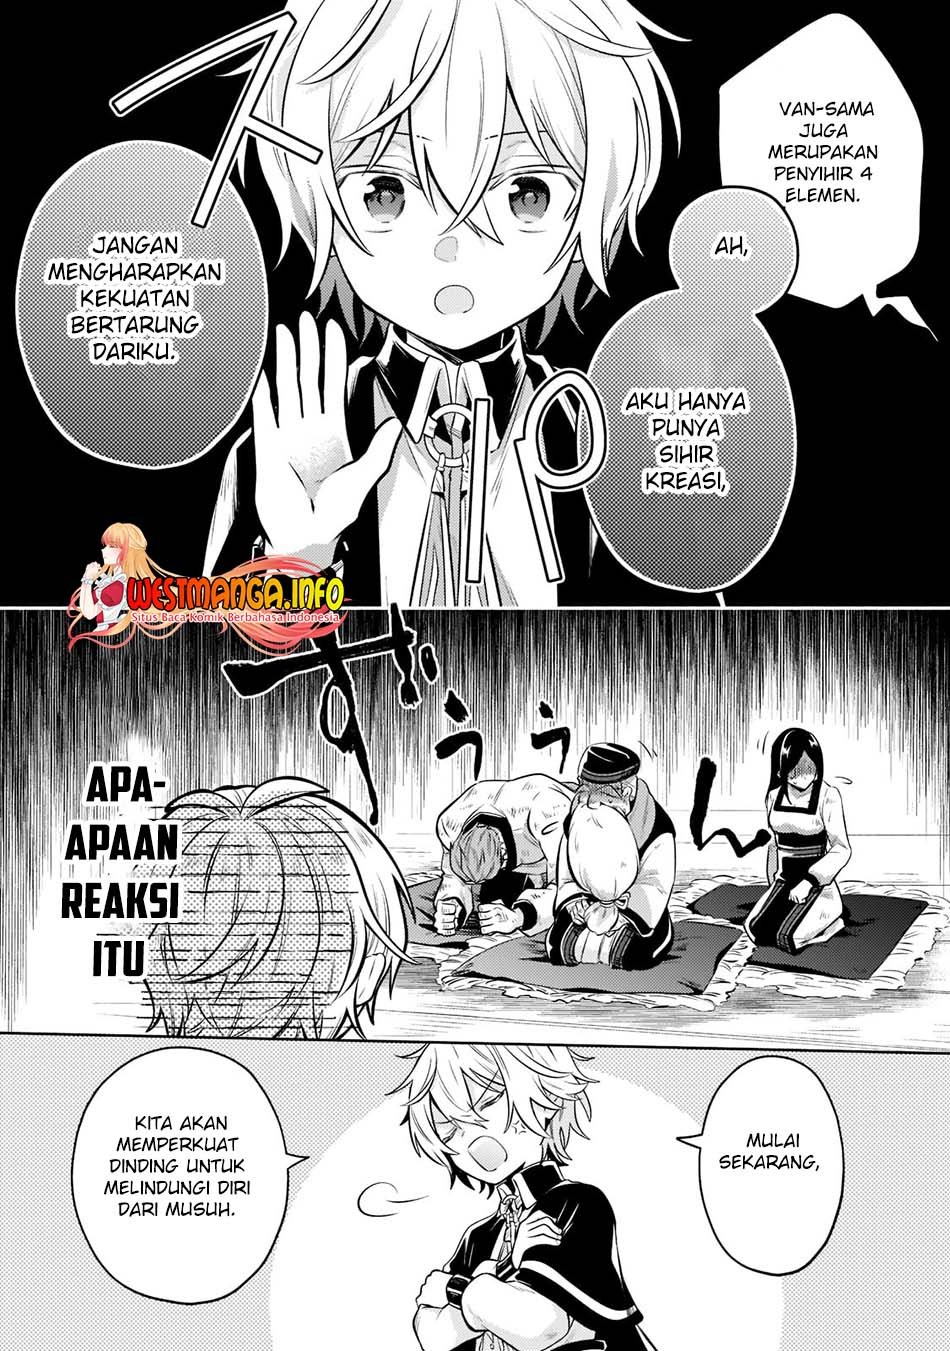 Fun Territory Defense Of The Easy-Going Lord ~The Nameless Village Is Made Into The Strongest Fortified City By Production Magic~ Chapter 07 - 199